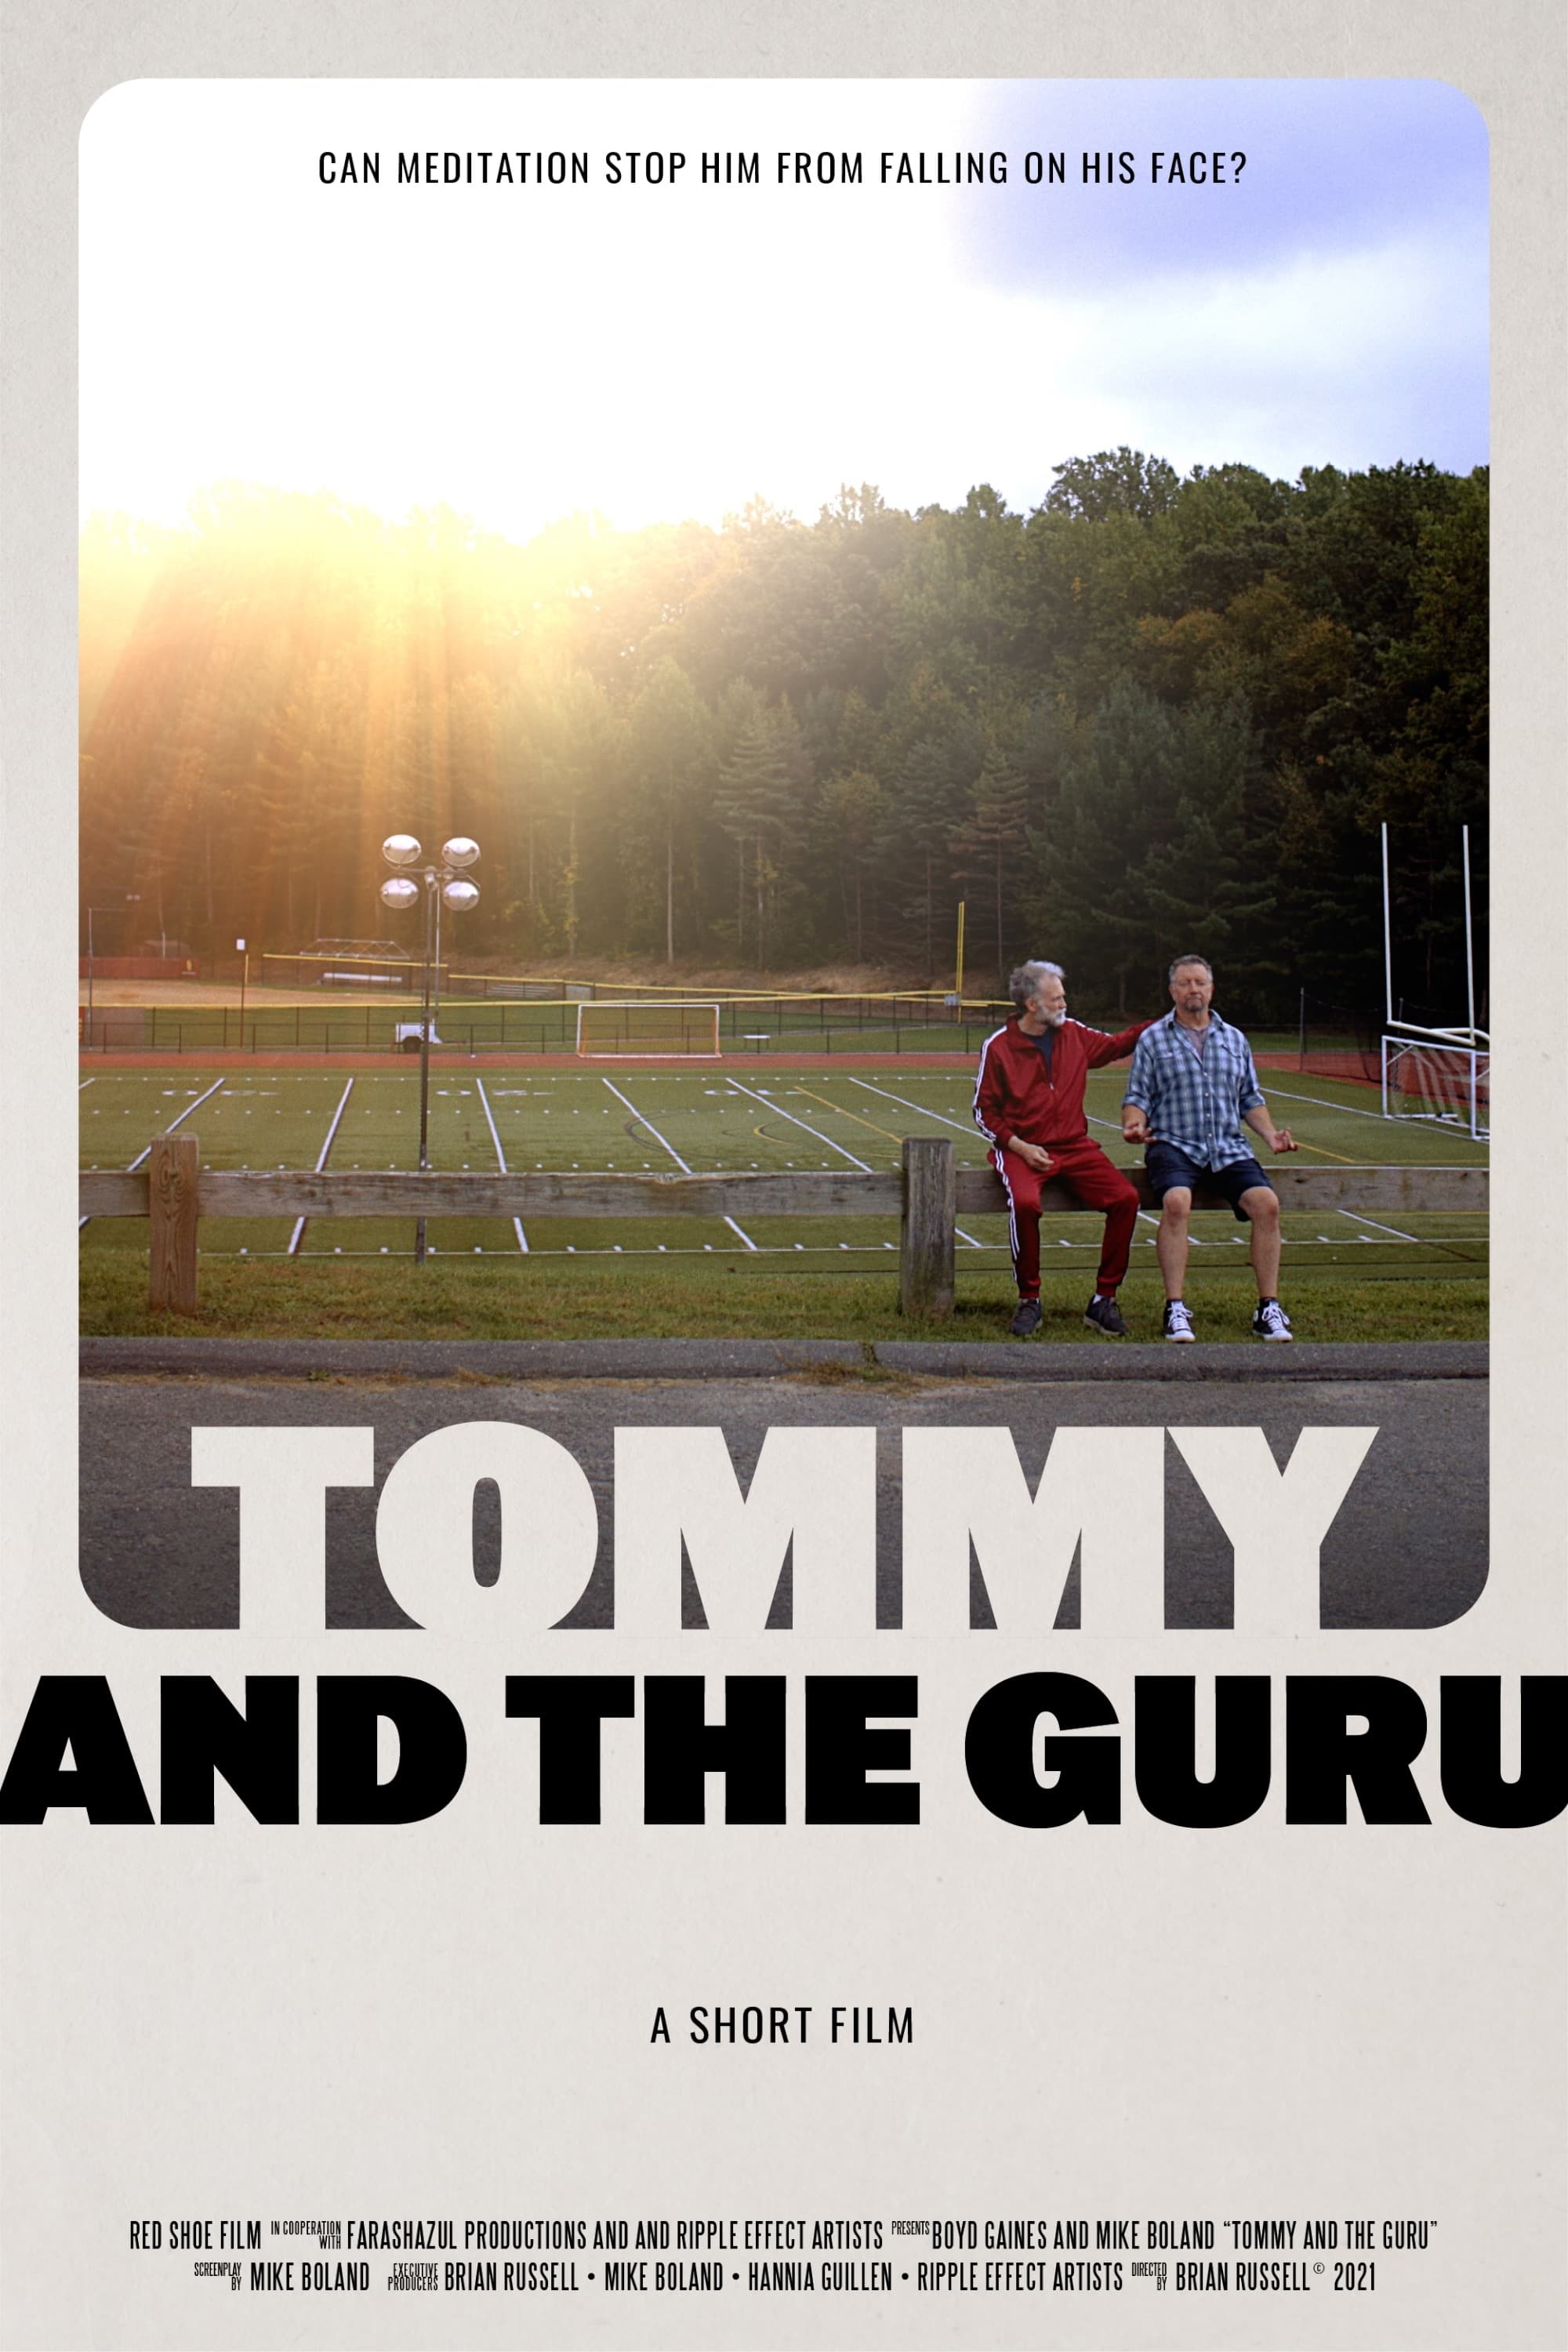 Tommy and the Guru